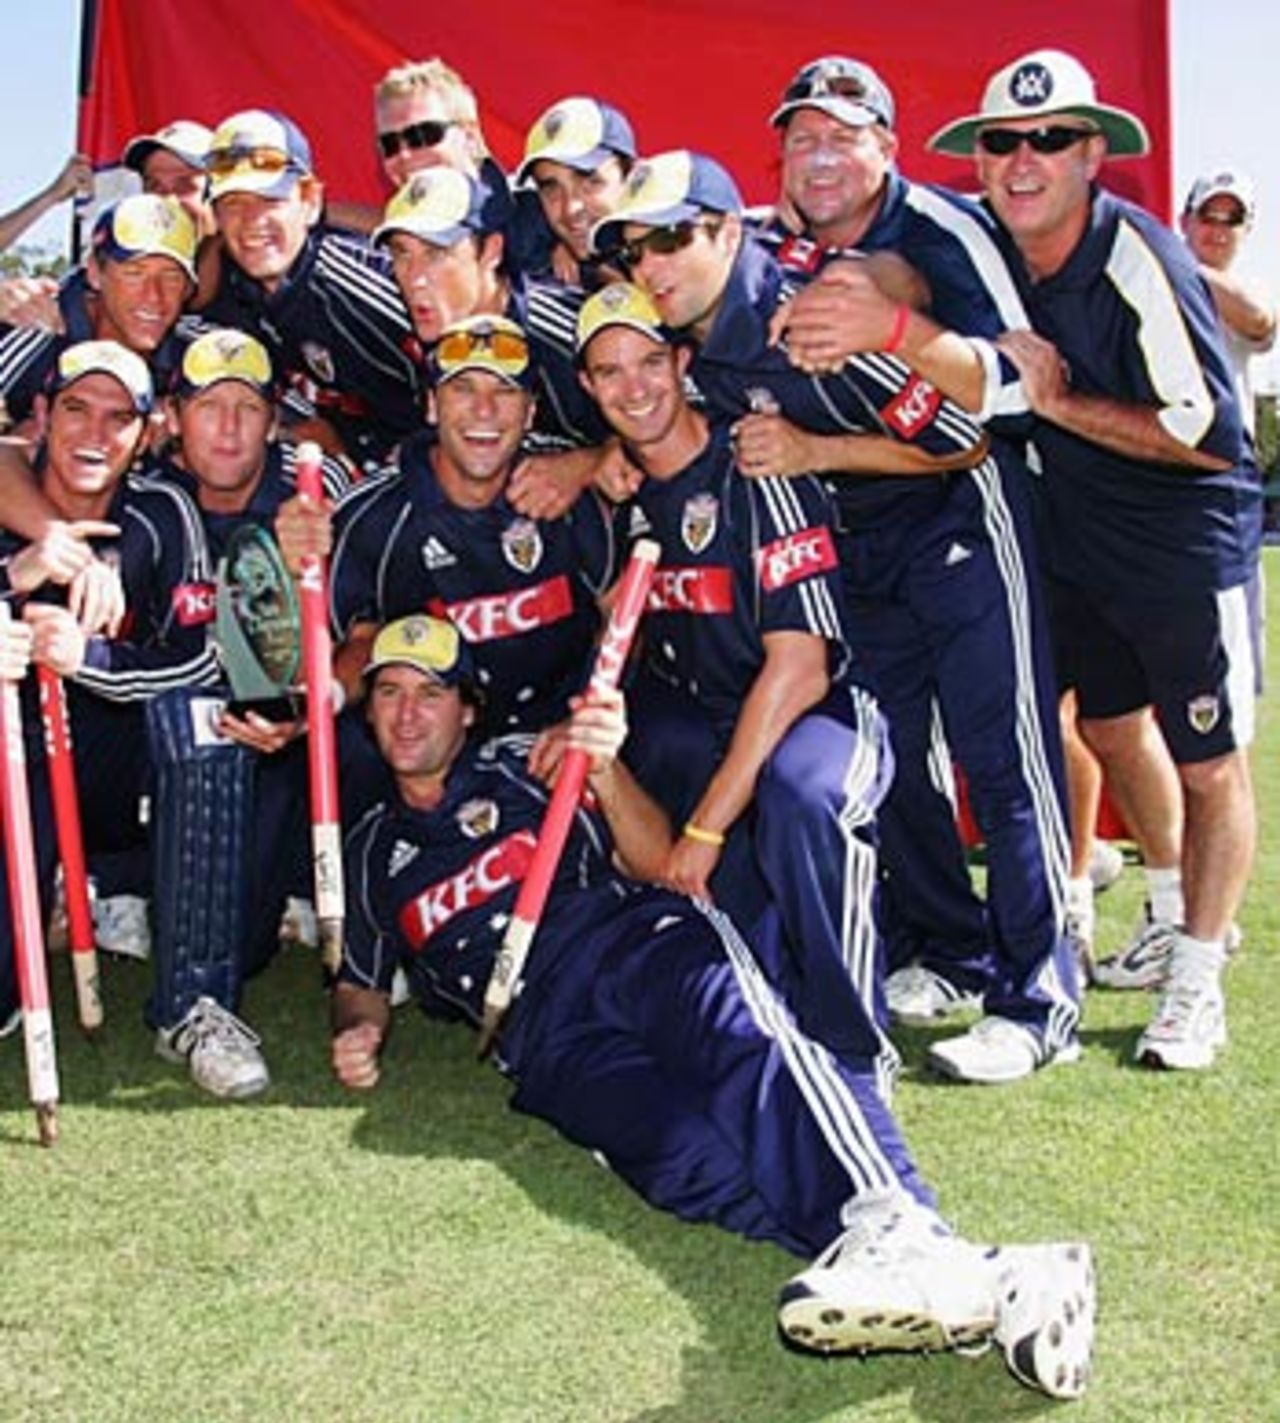 Victoria pose with the trophy after beating New South wales by 93 runs, New South Wales v Victoria, Twenty20 Final, Sydney, January 21, 2006